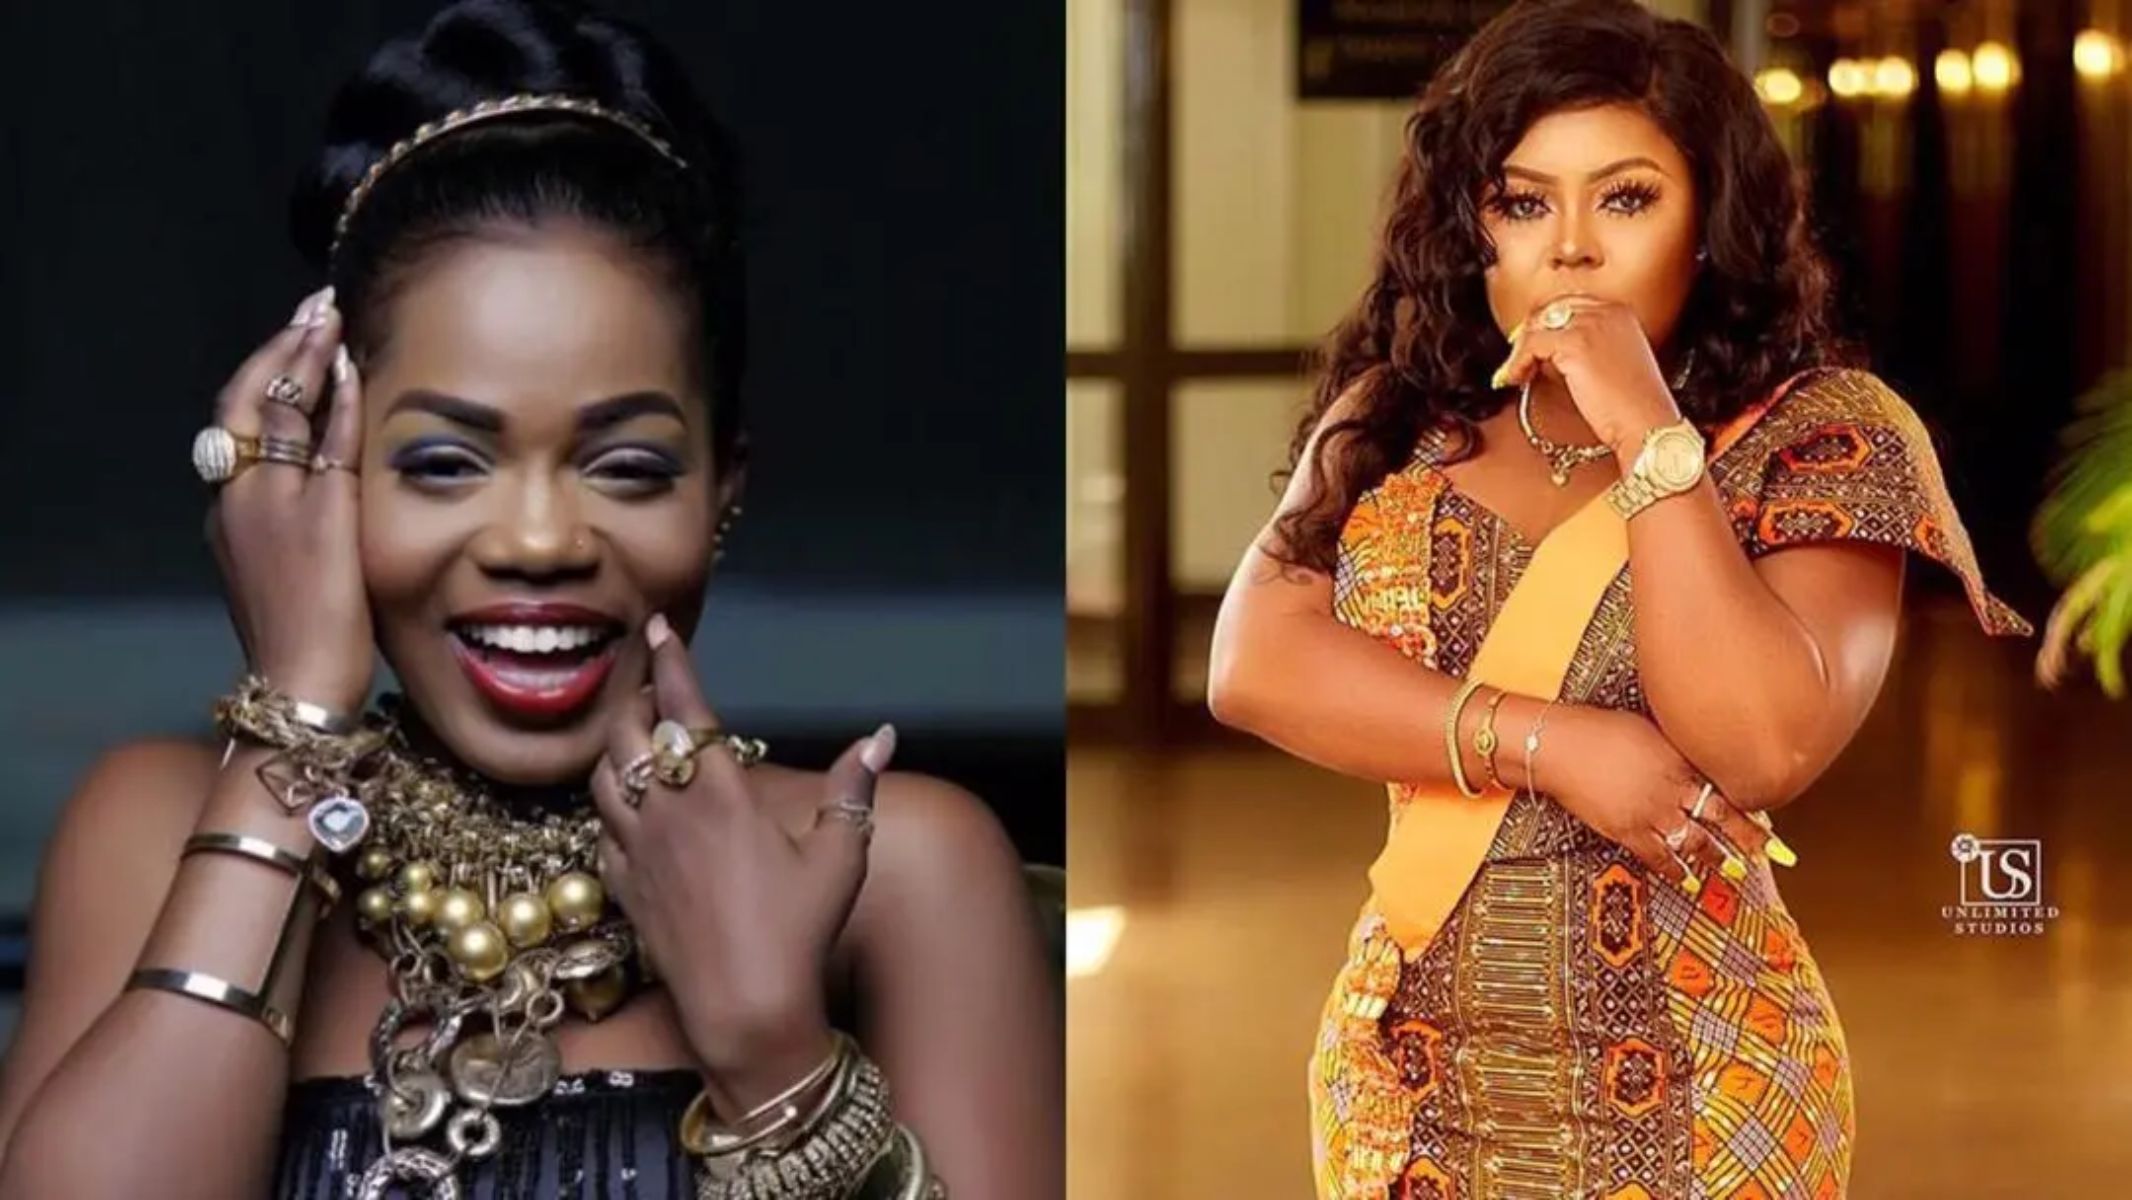 'Drama At This Age Is Embarrassing, I Don't Associate' - Mzbel Epic Reply To Afia Schwar Over Her 'Death' Comment